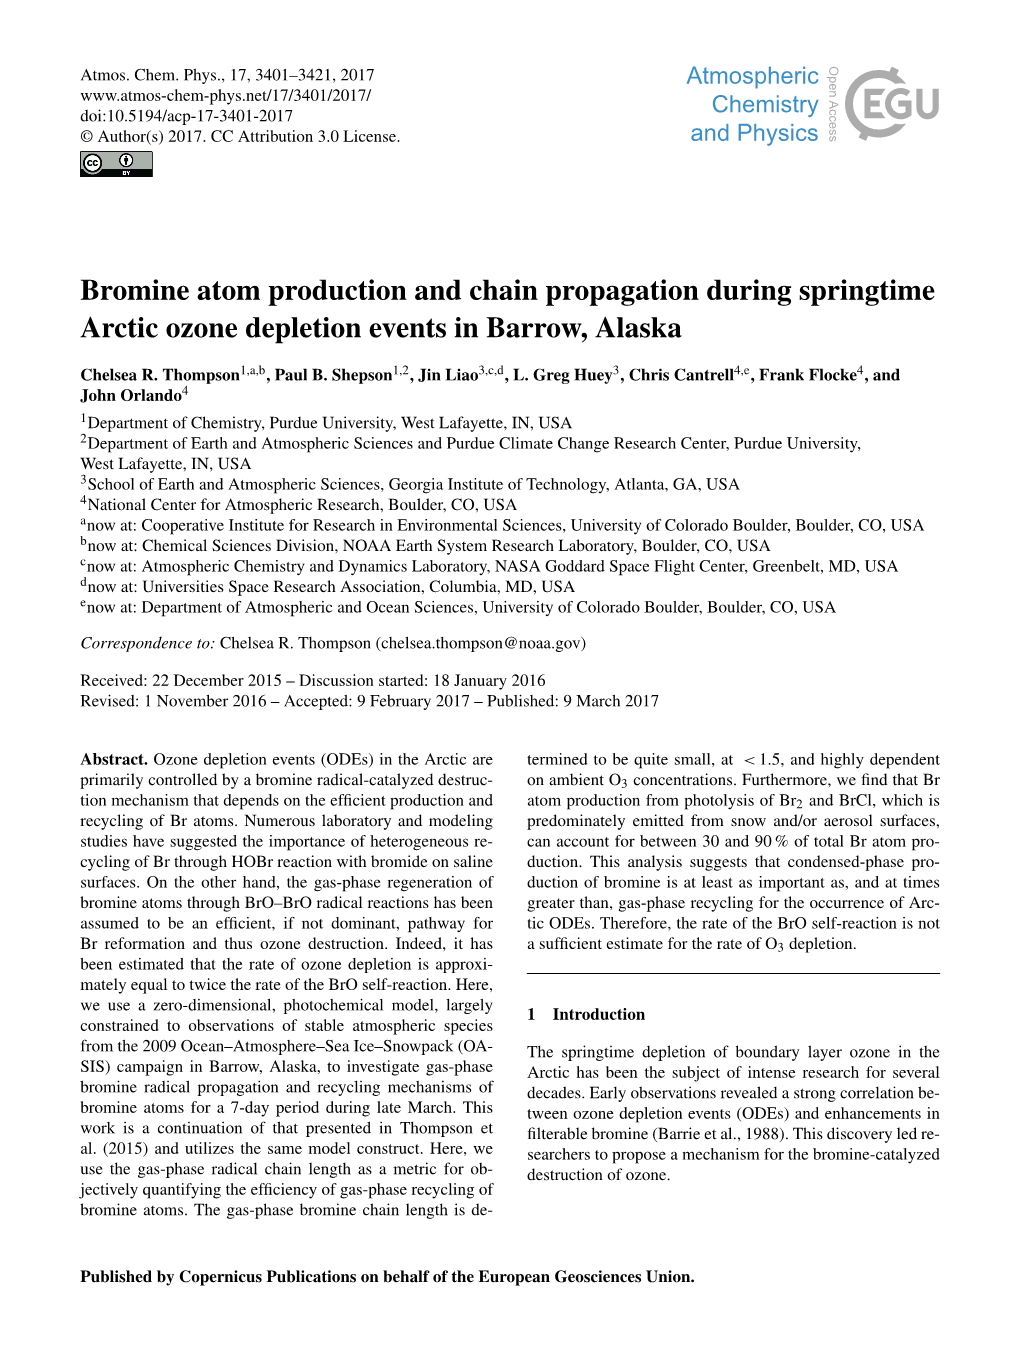 Bromine Atom Production and Chain Propagation During Springtime Arctic Ozone Depletion Events in Barrow, Alaska